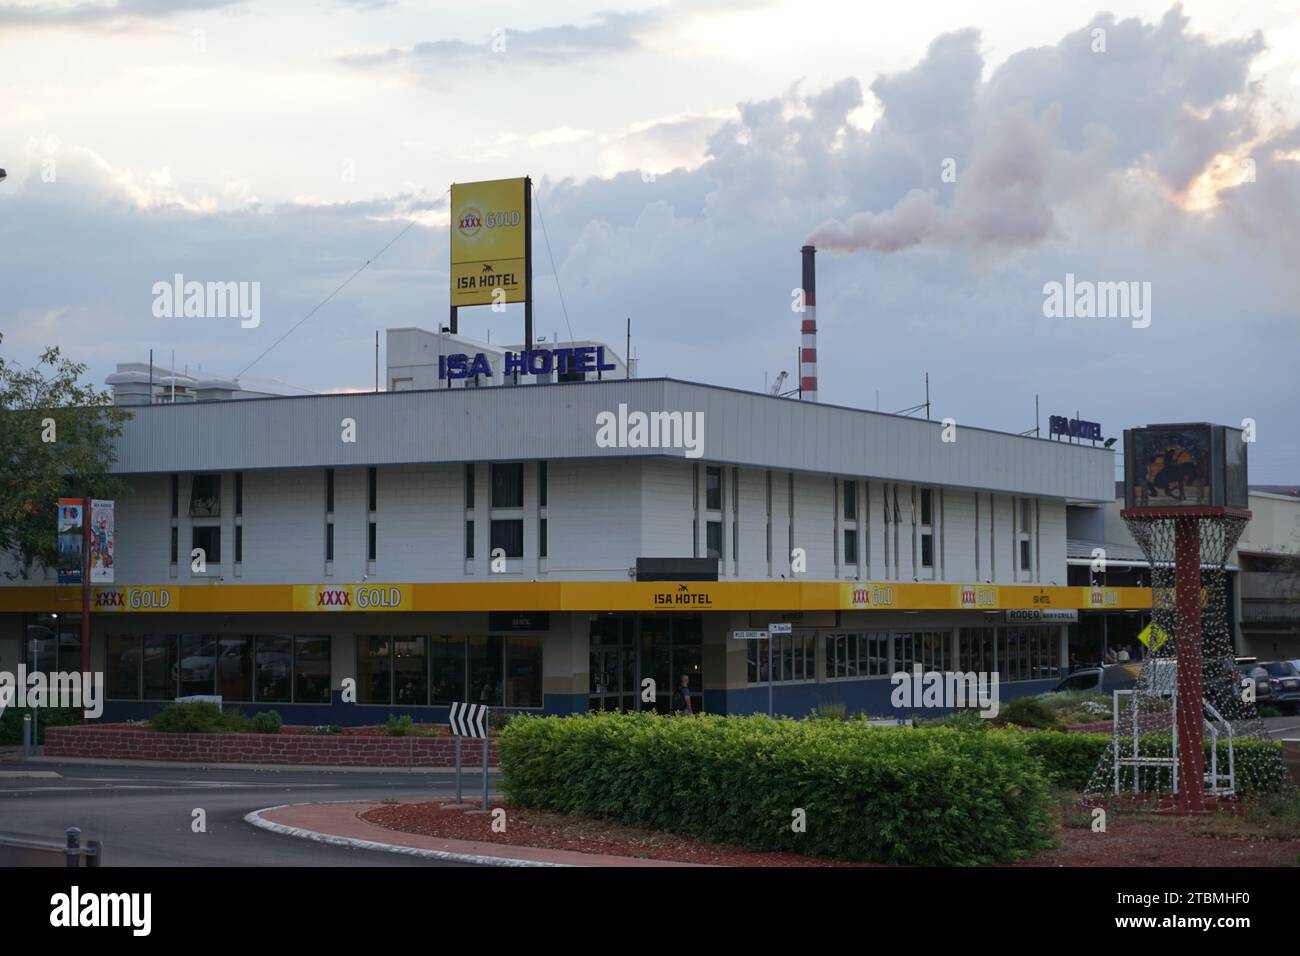 ISA Hotel and Rodeo Bar and Grill esterno con pubblicità XXXX Gold beer, Mount Isa, Queensland, Australia Foto Stock